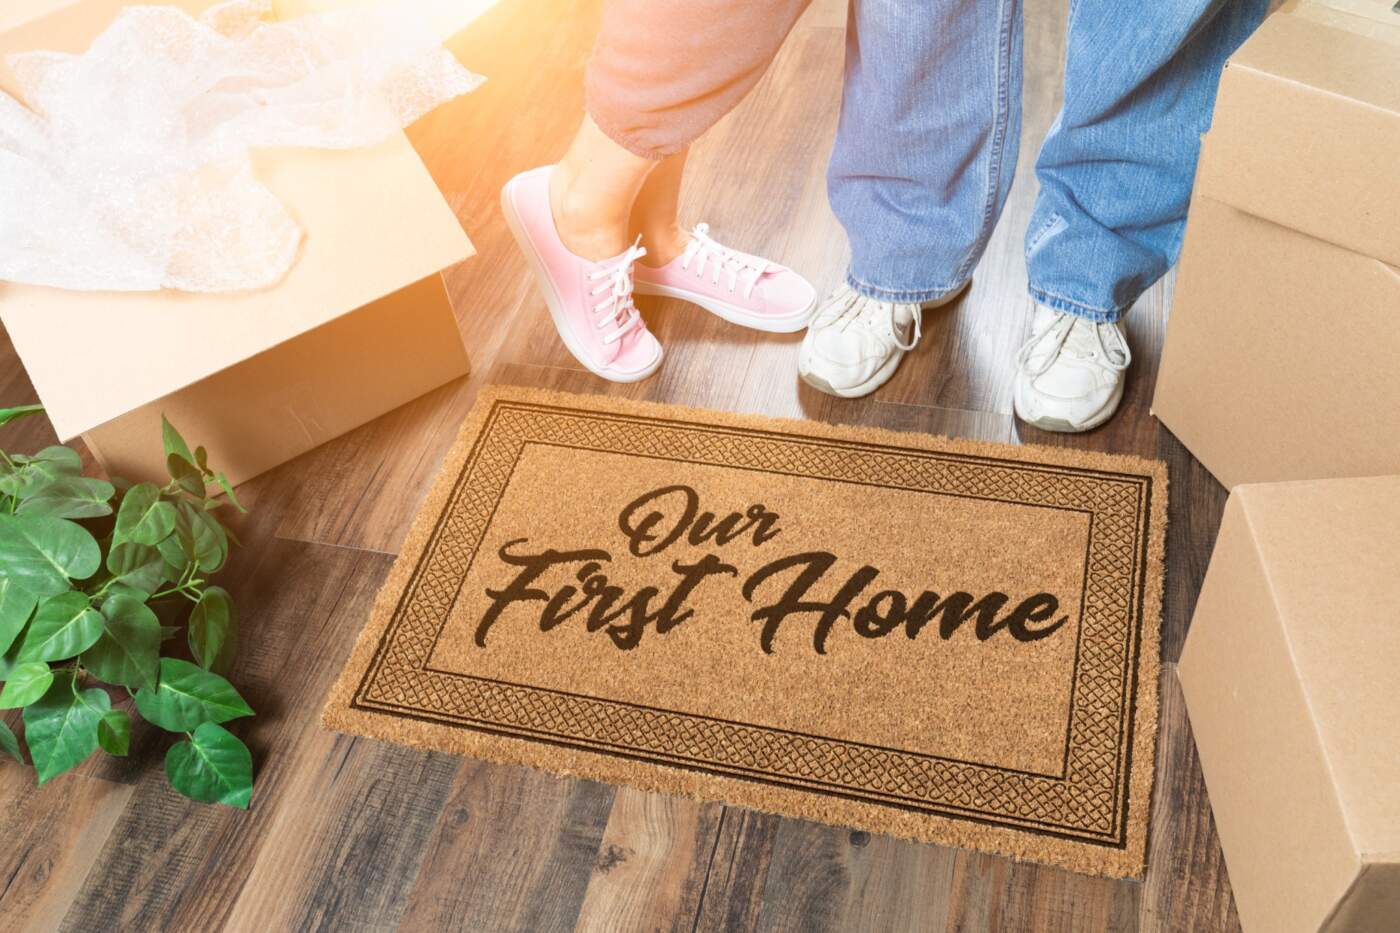 picture of a welcome mat with the words "our first home" at the feet of people unpacking